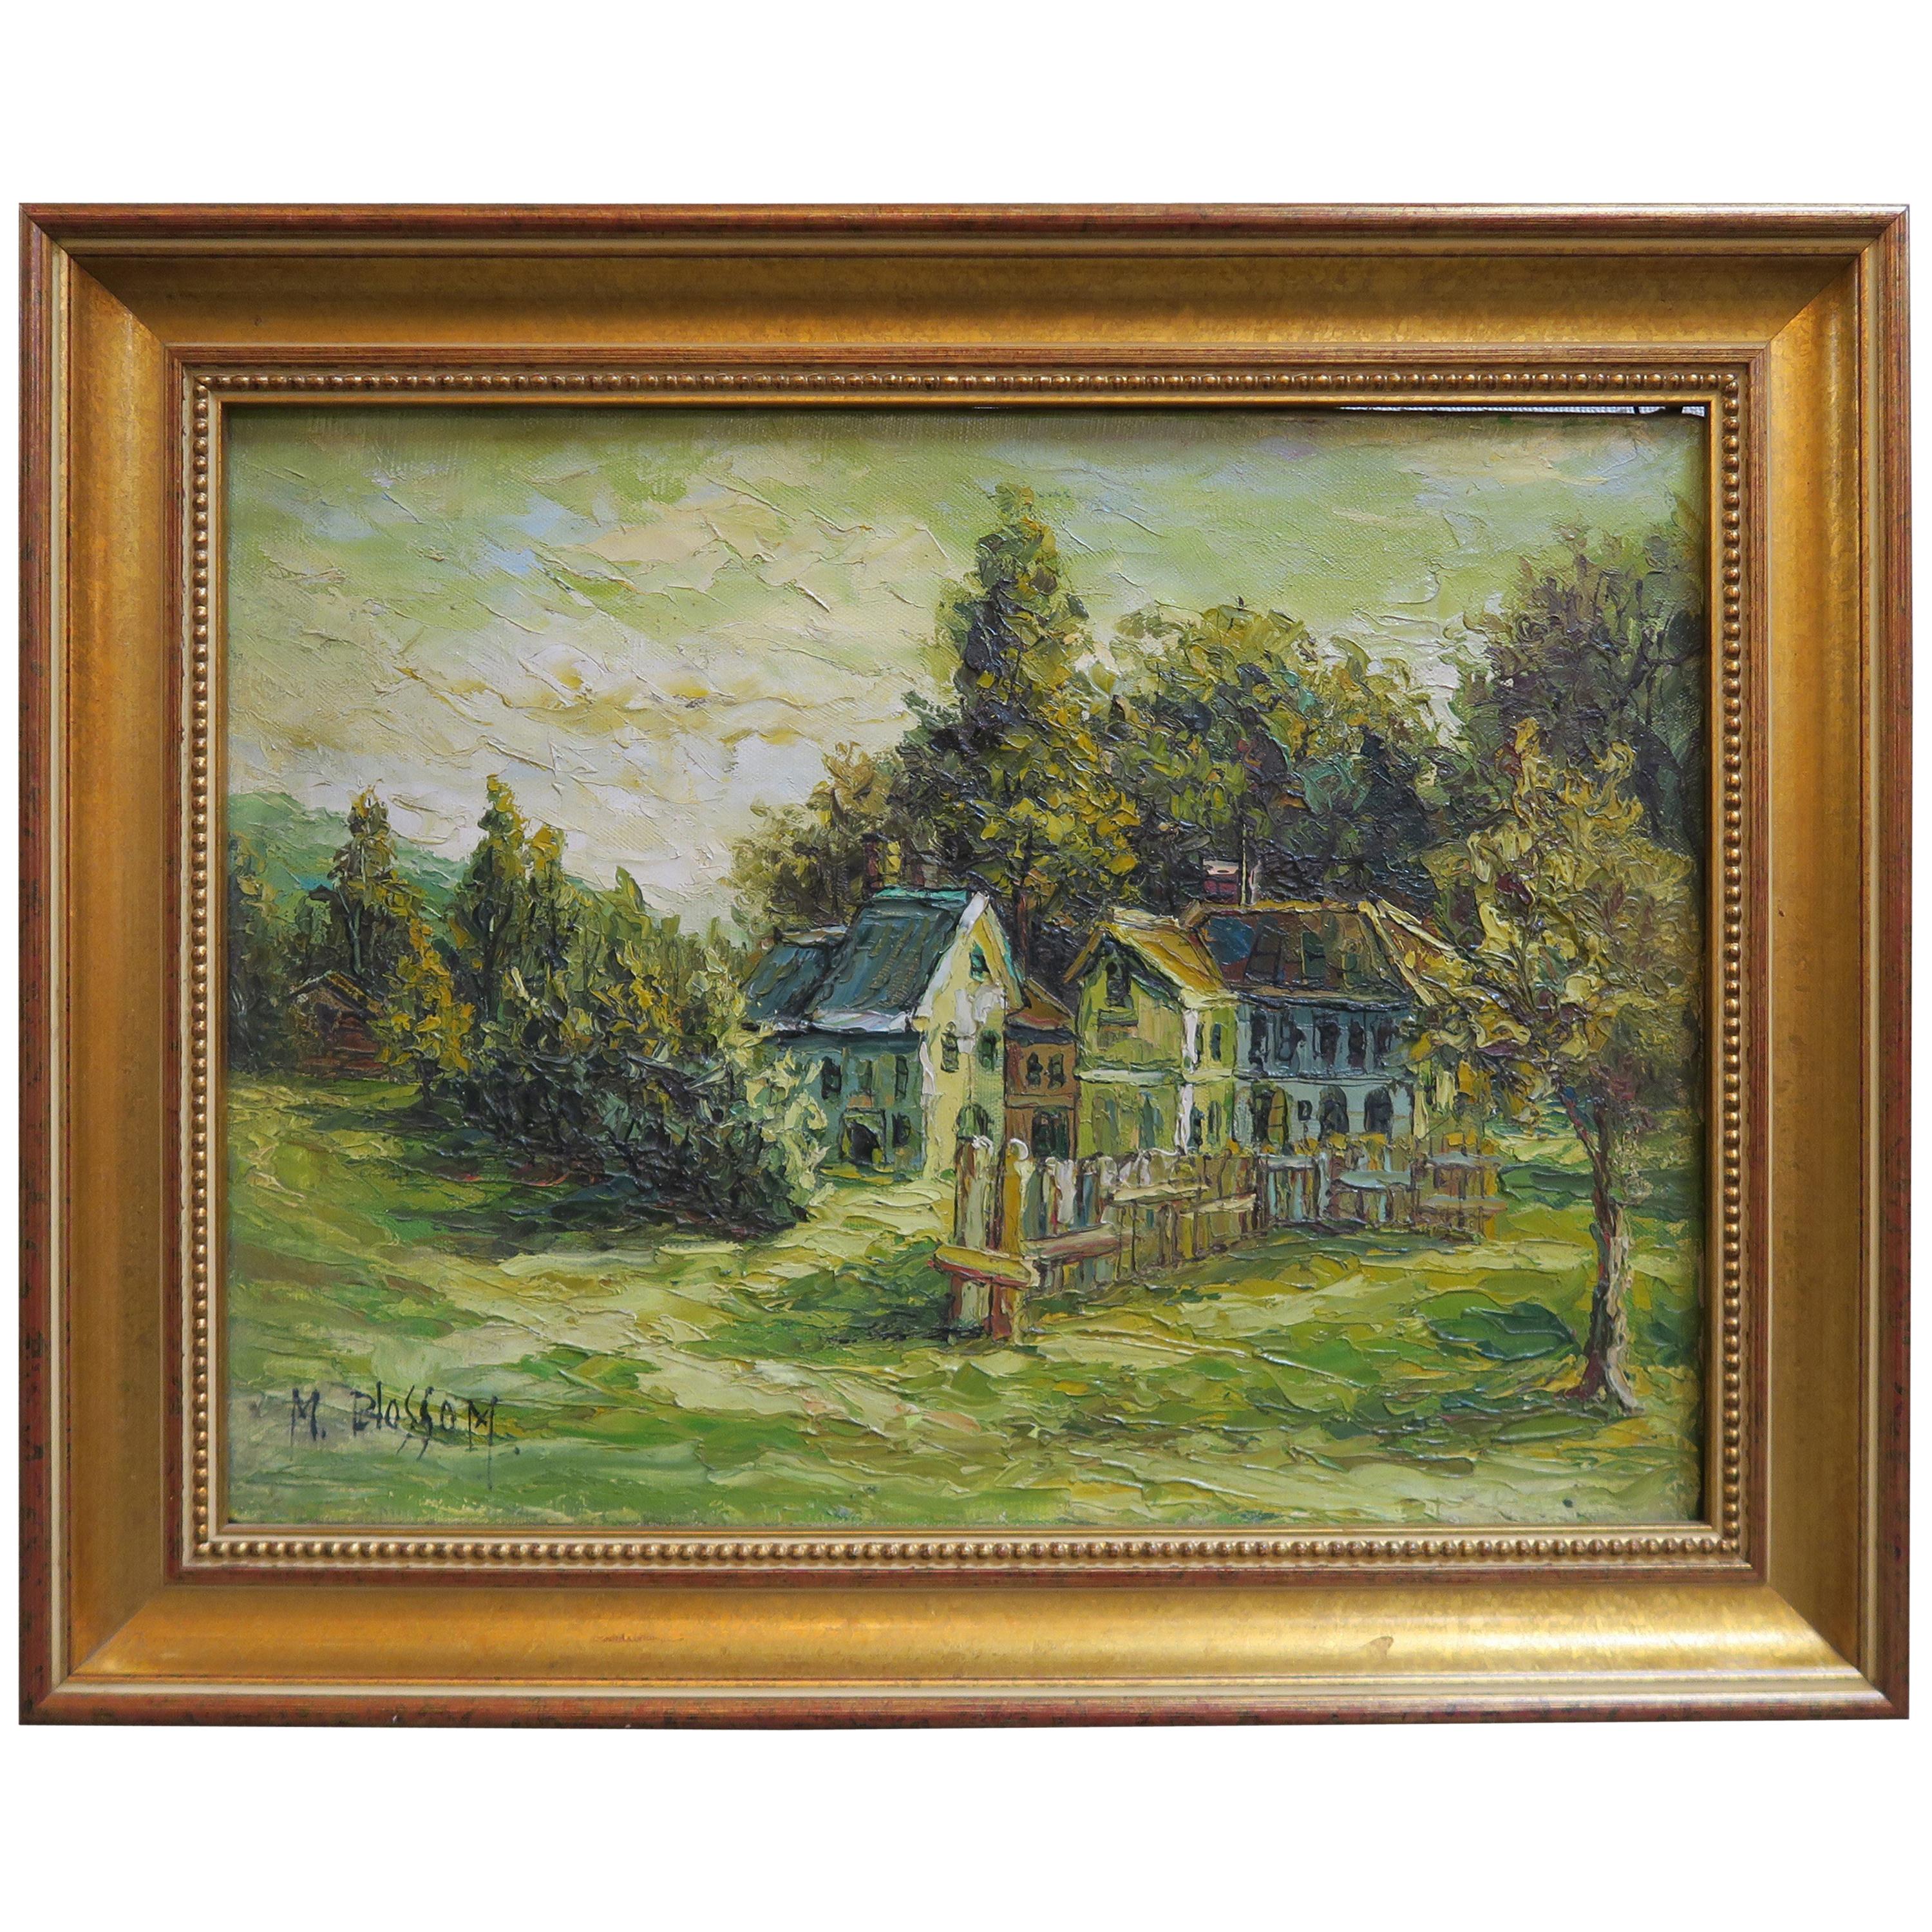 Charming Oil On Canvas Signed, M. Blossom